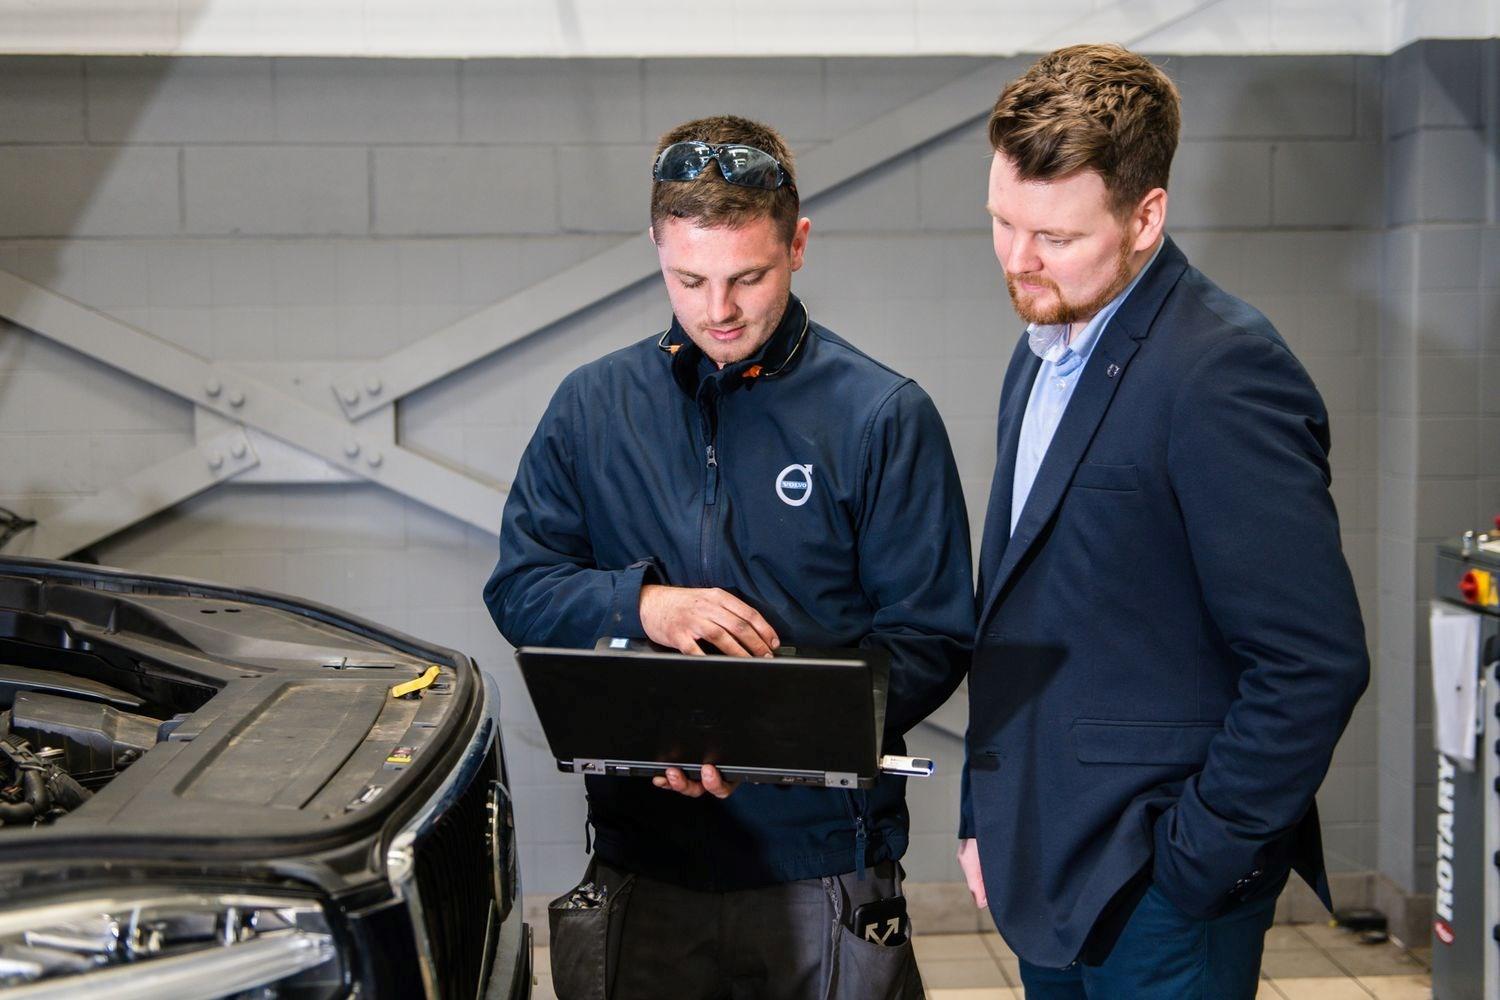 Volvo Repair Specialist inspects used car on laptop with Volvo customer in Volvo Repair Centre for electrical repairs